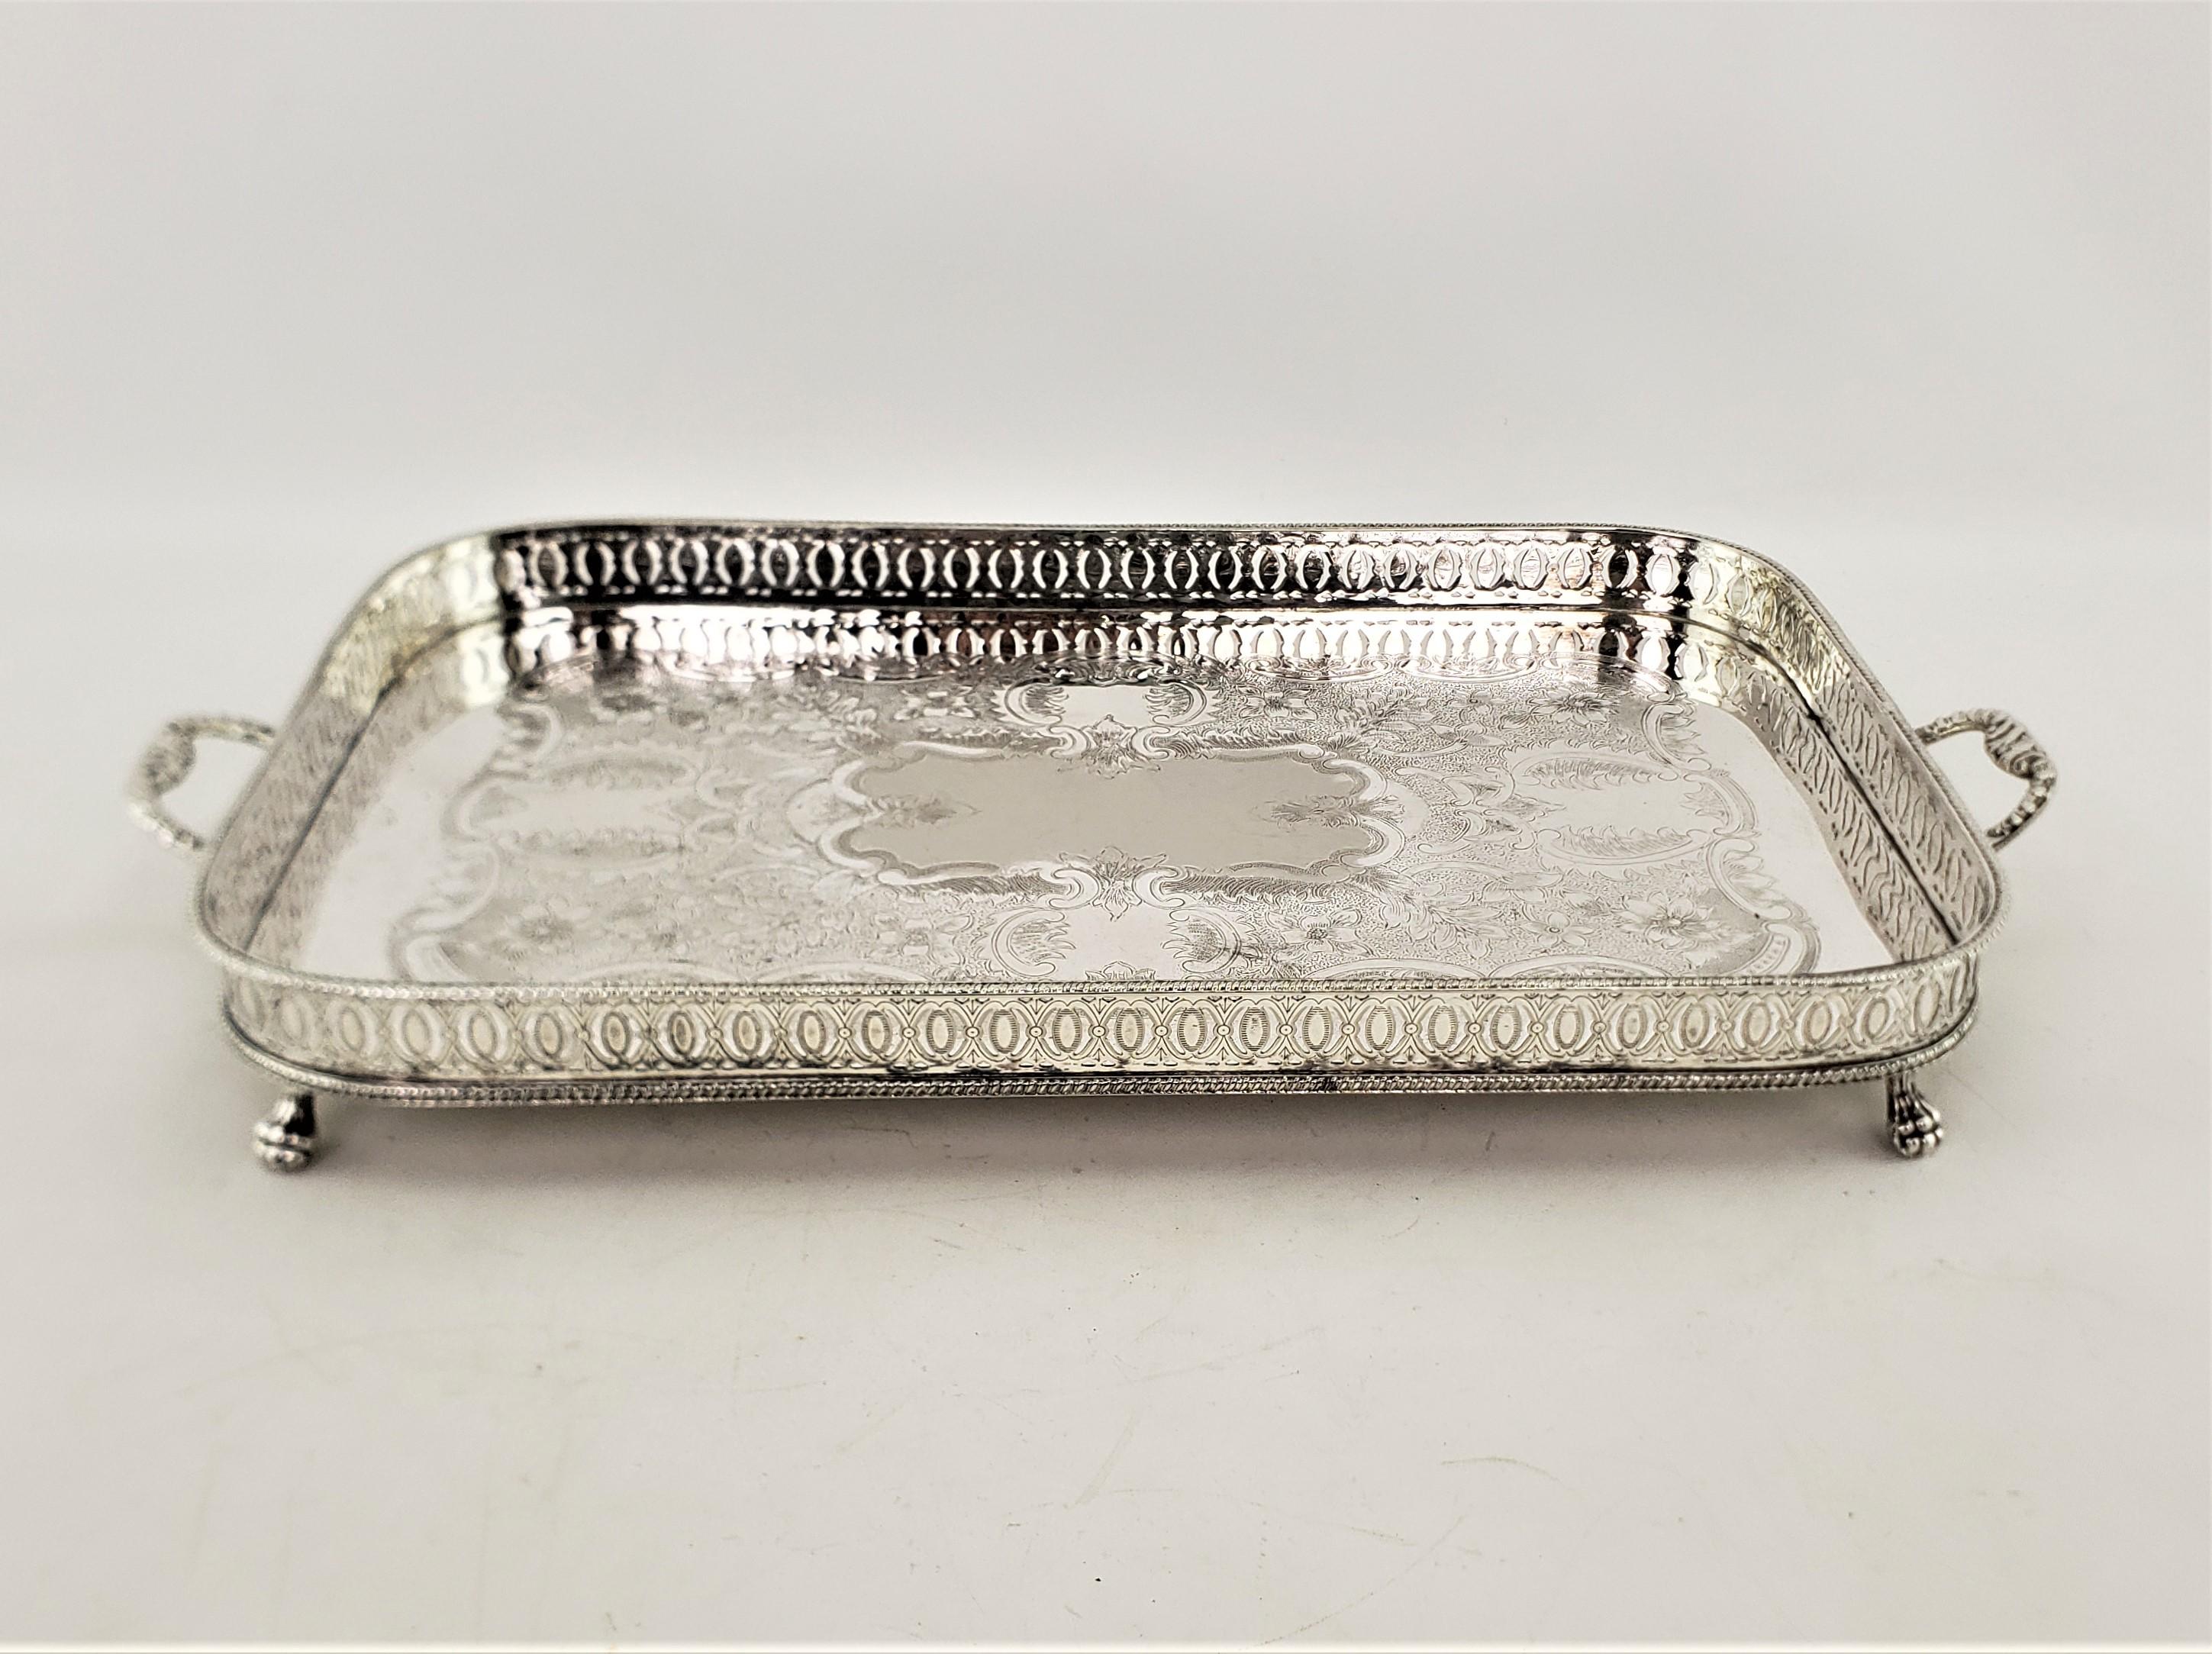 Antique English Silver Plated Footed Gallery Serving Tray with Floral Engraving 2